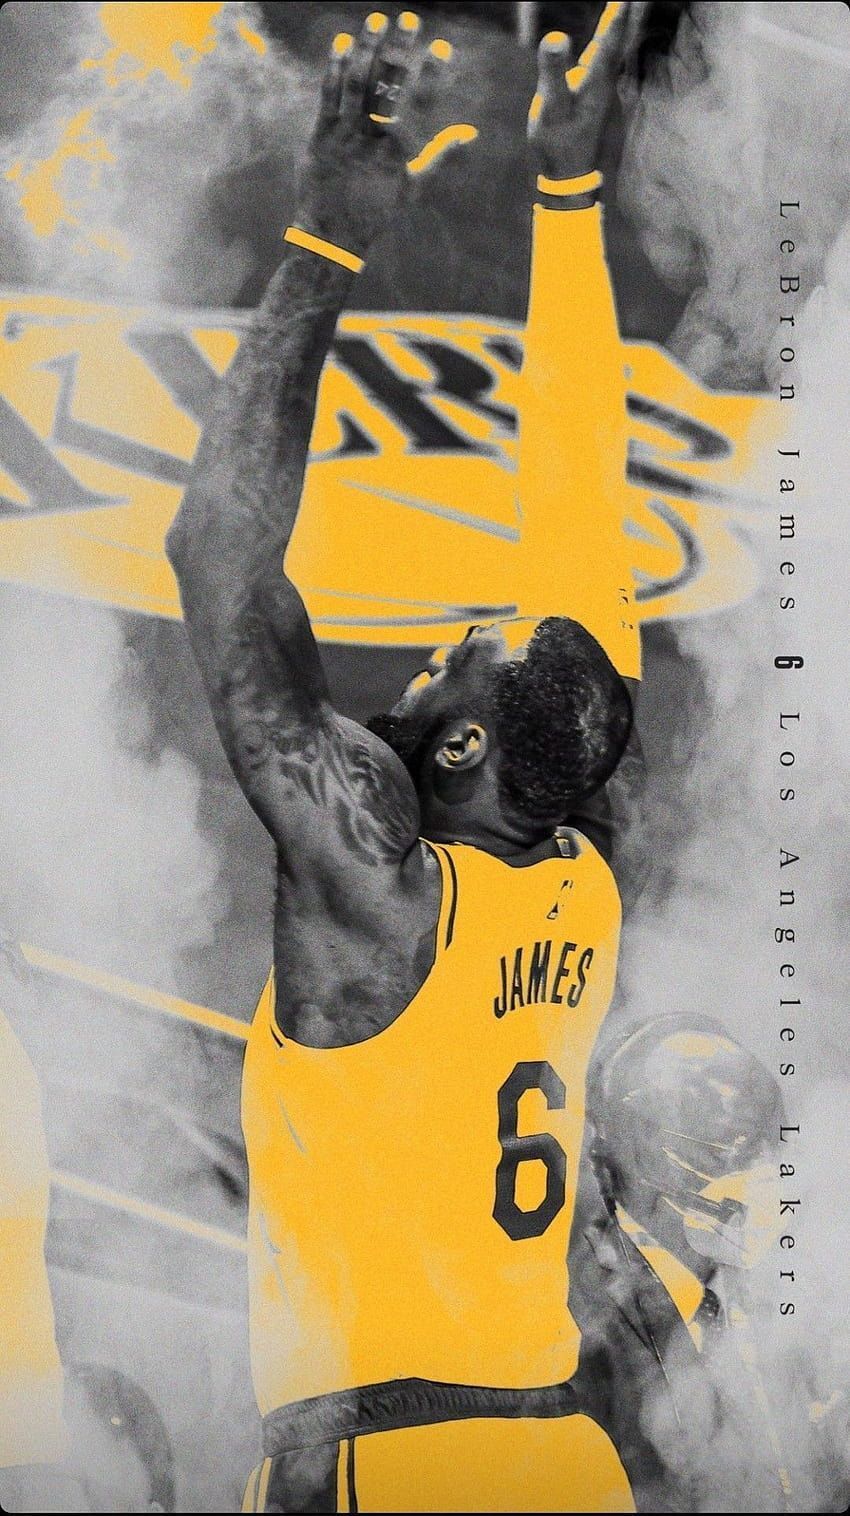 Lakers wallpaper I made for my phone - Lebron James